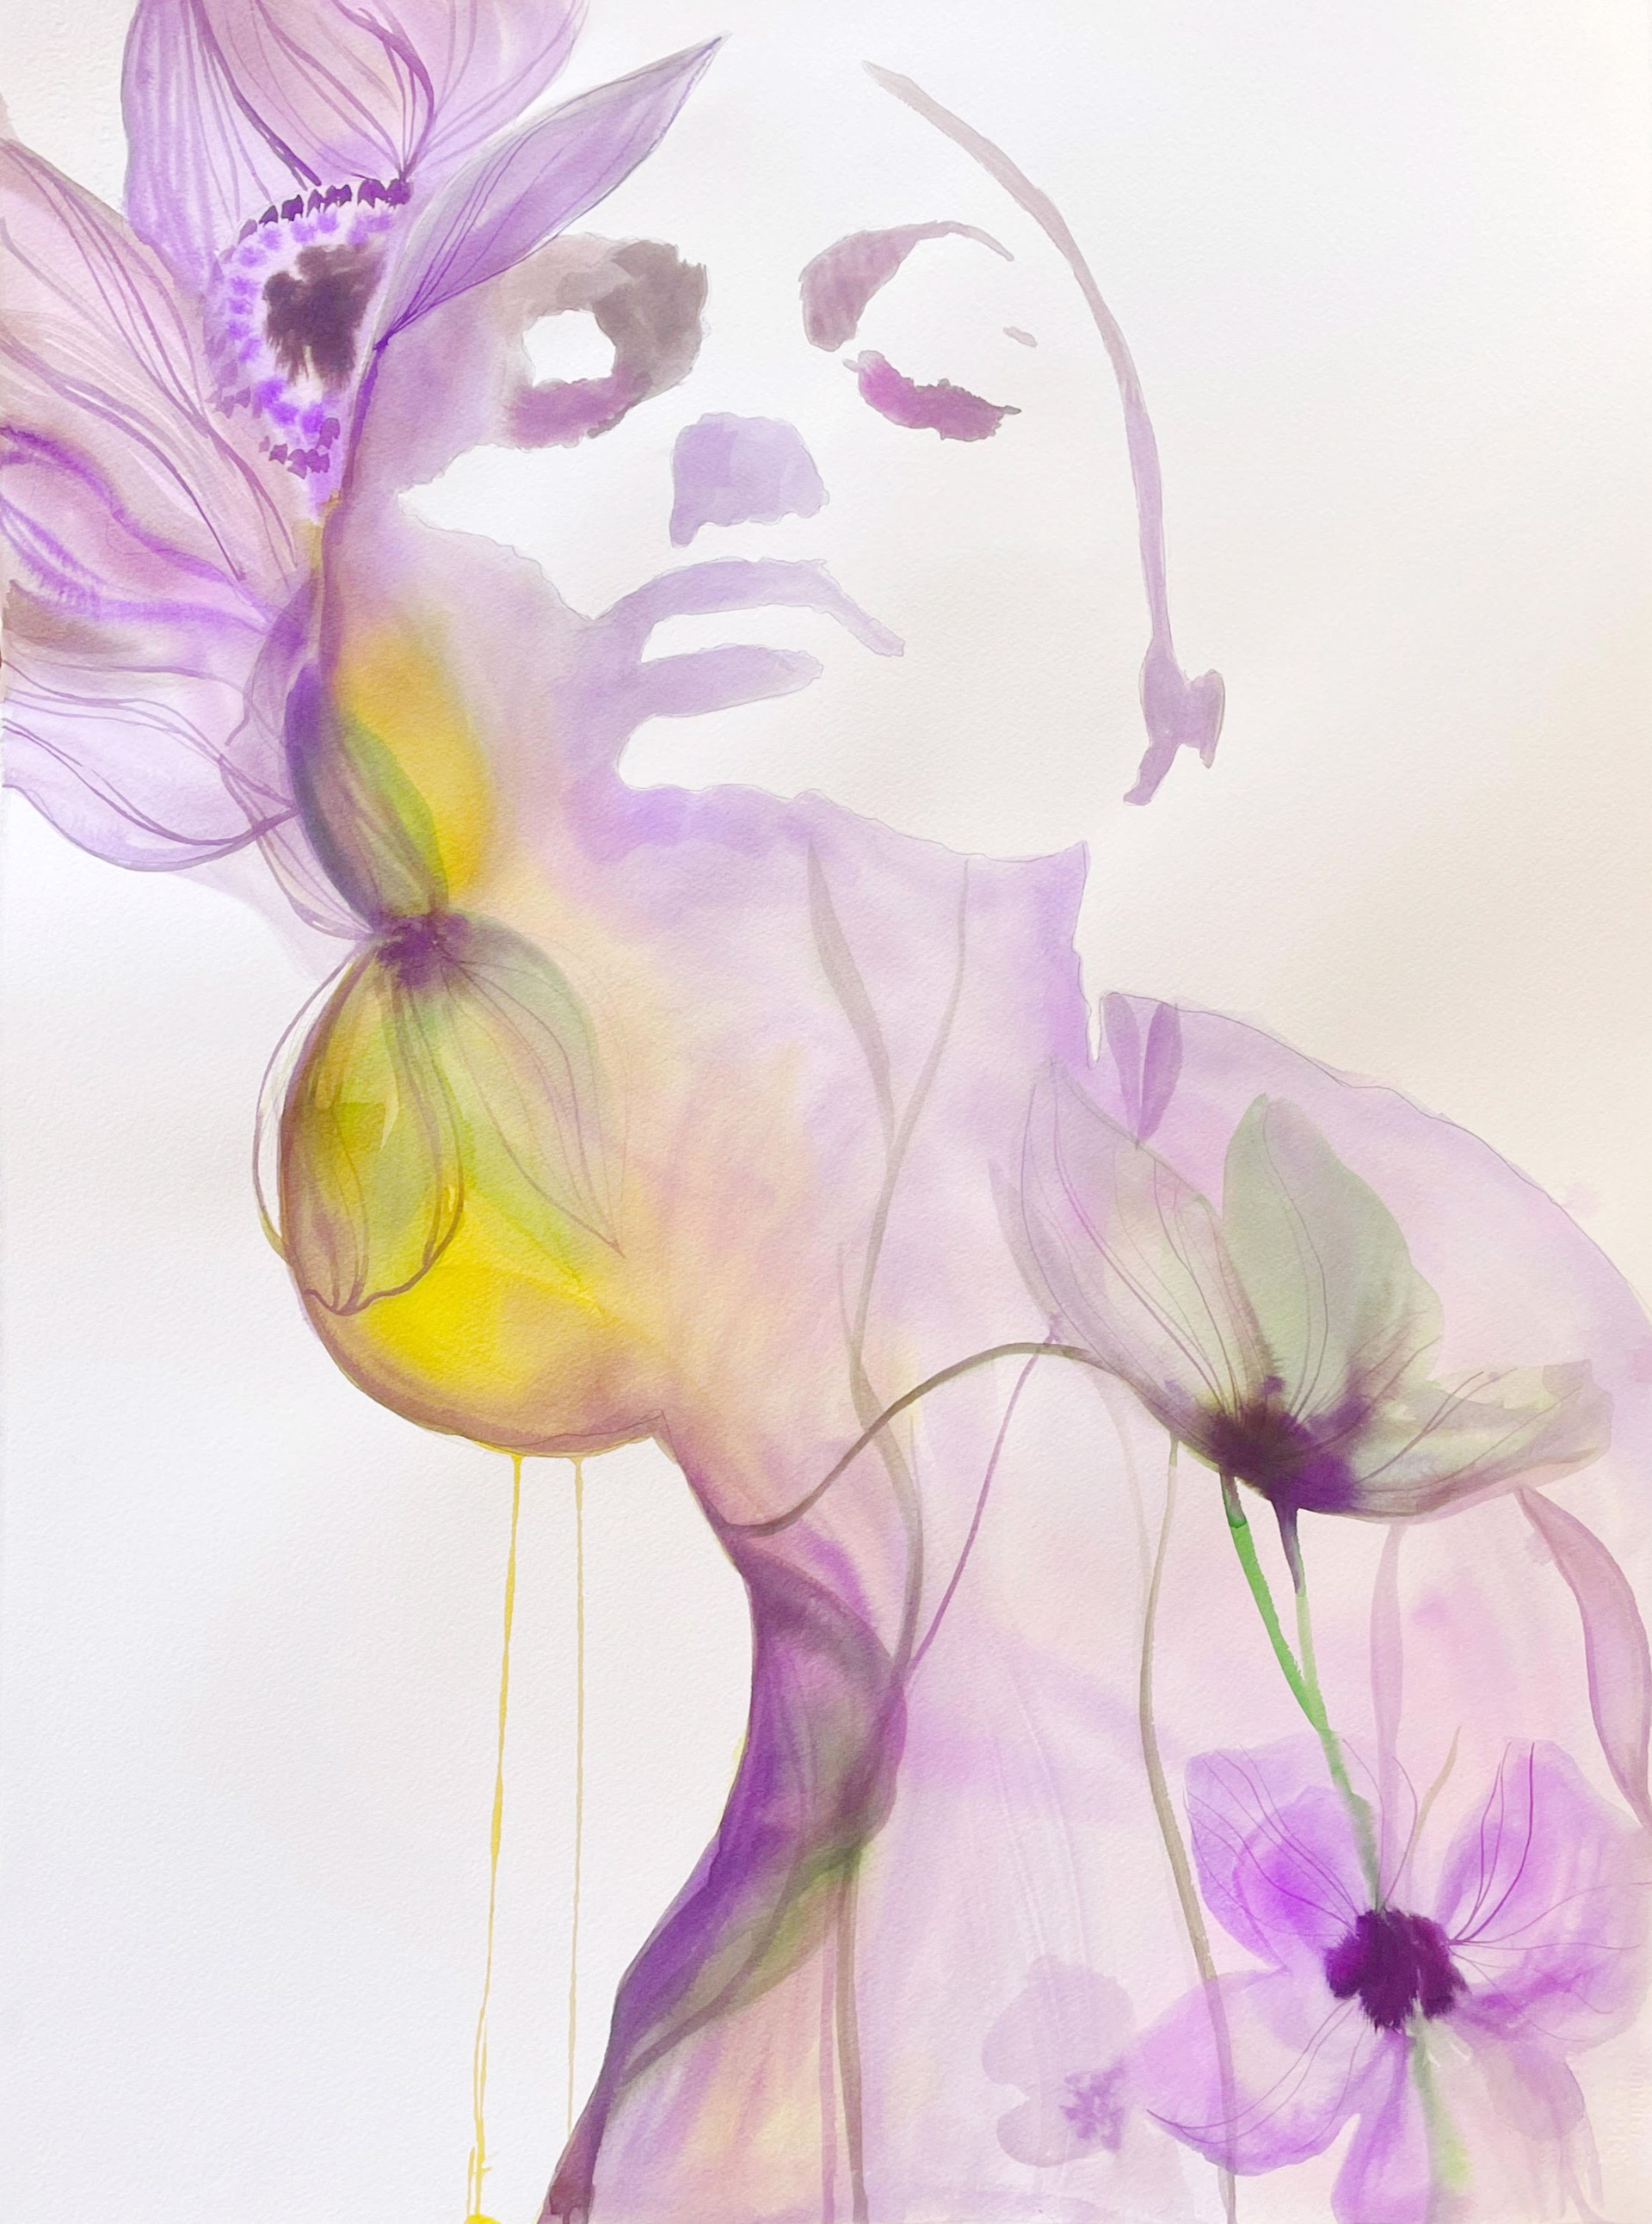 Violet Femme by Jessica Durrant